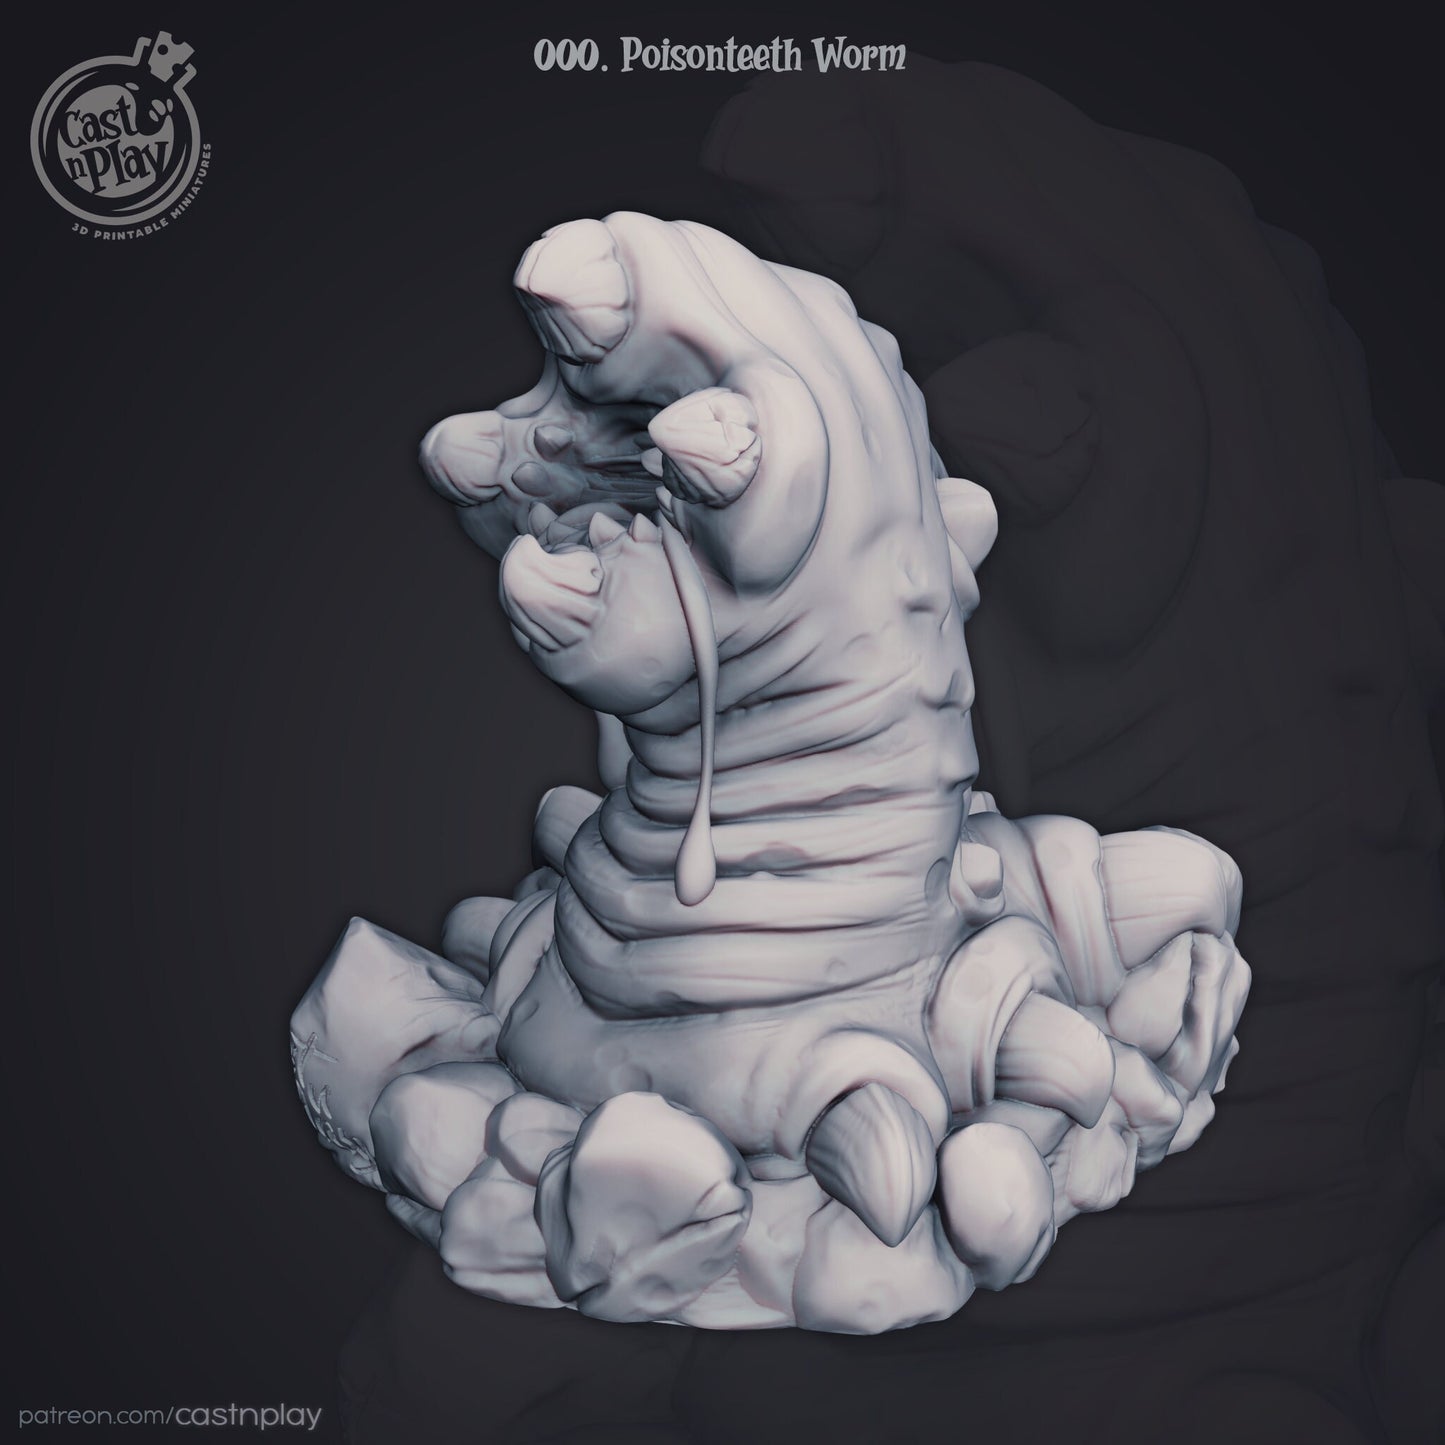 POISONTEETH WORM, by Cast n Play // 3D Print on Demand / D&D / Pathfinder / RPG